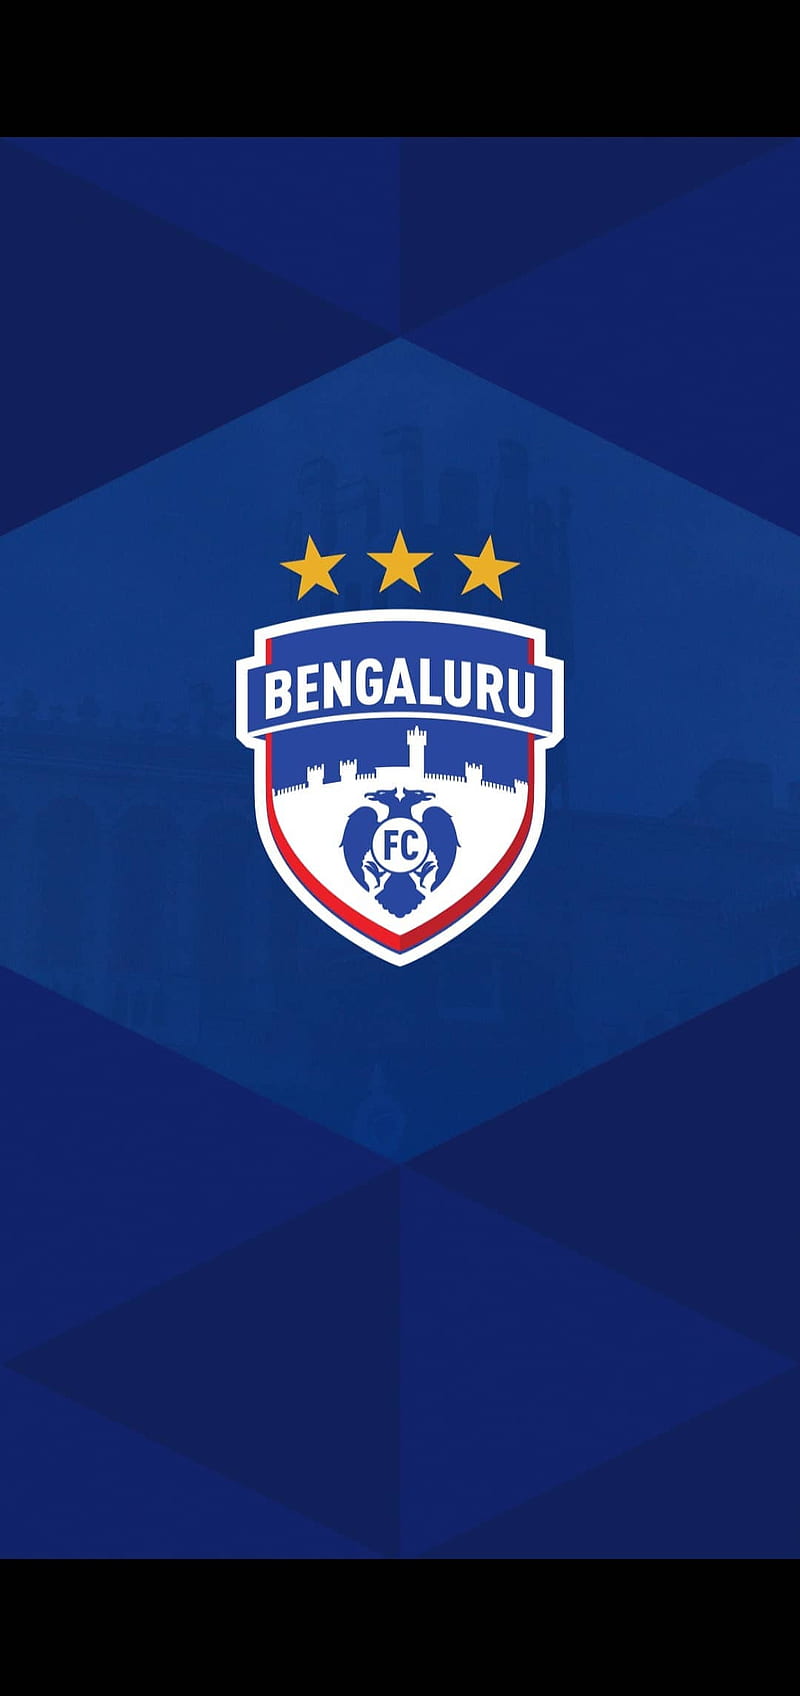 EatSure signs one-year deal with Bengaluru Football Club as Official  Foodcourt Partner